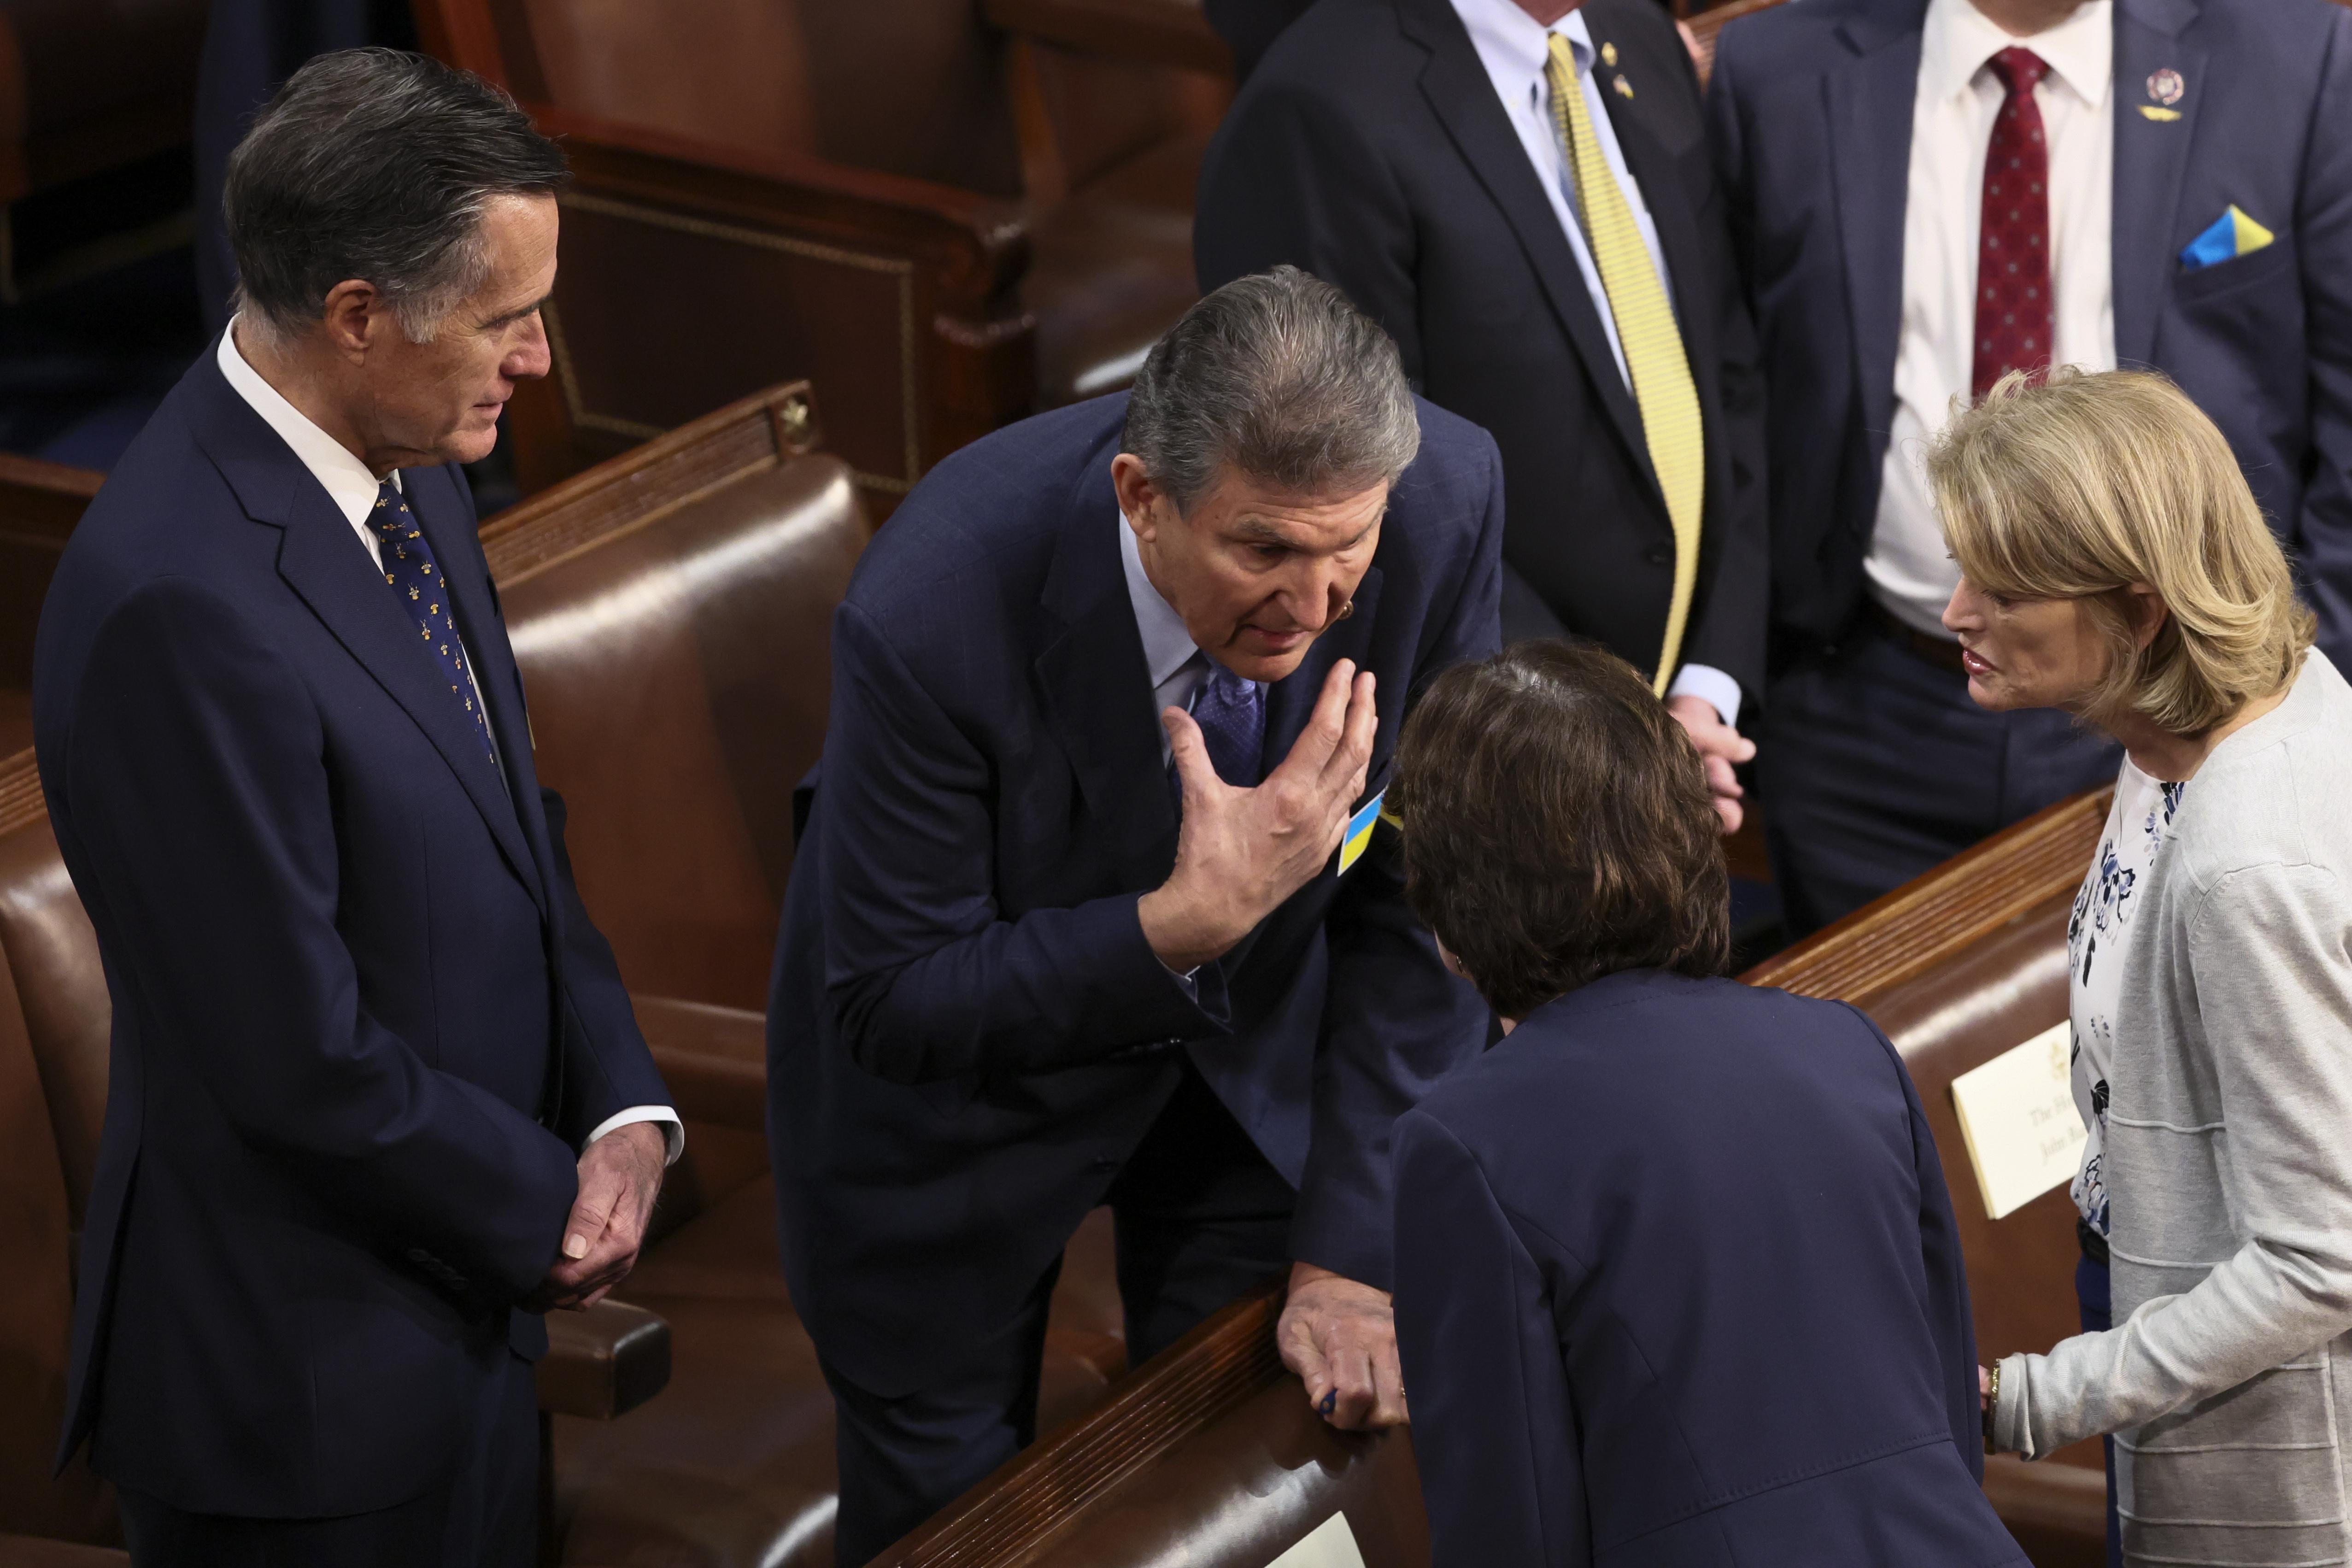 Manchin leans over to talk to Collins as Murkowski and Romney listen in.